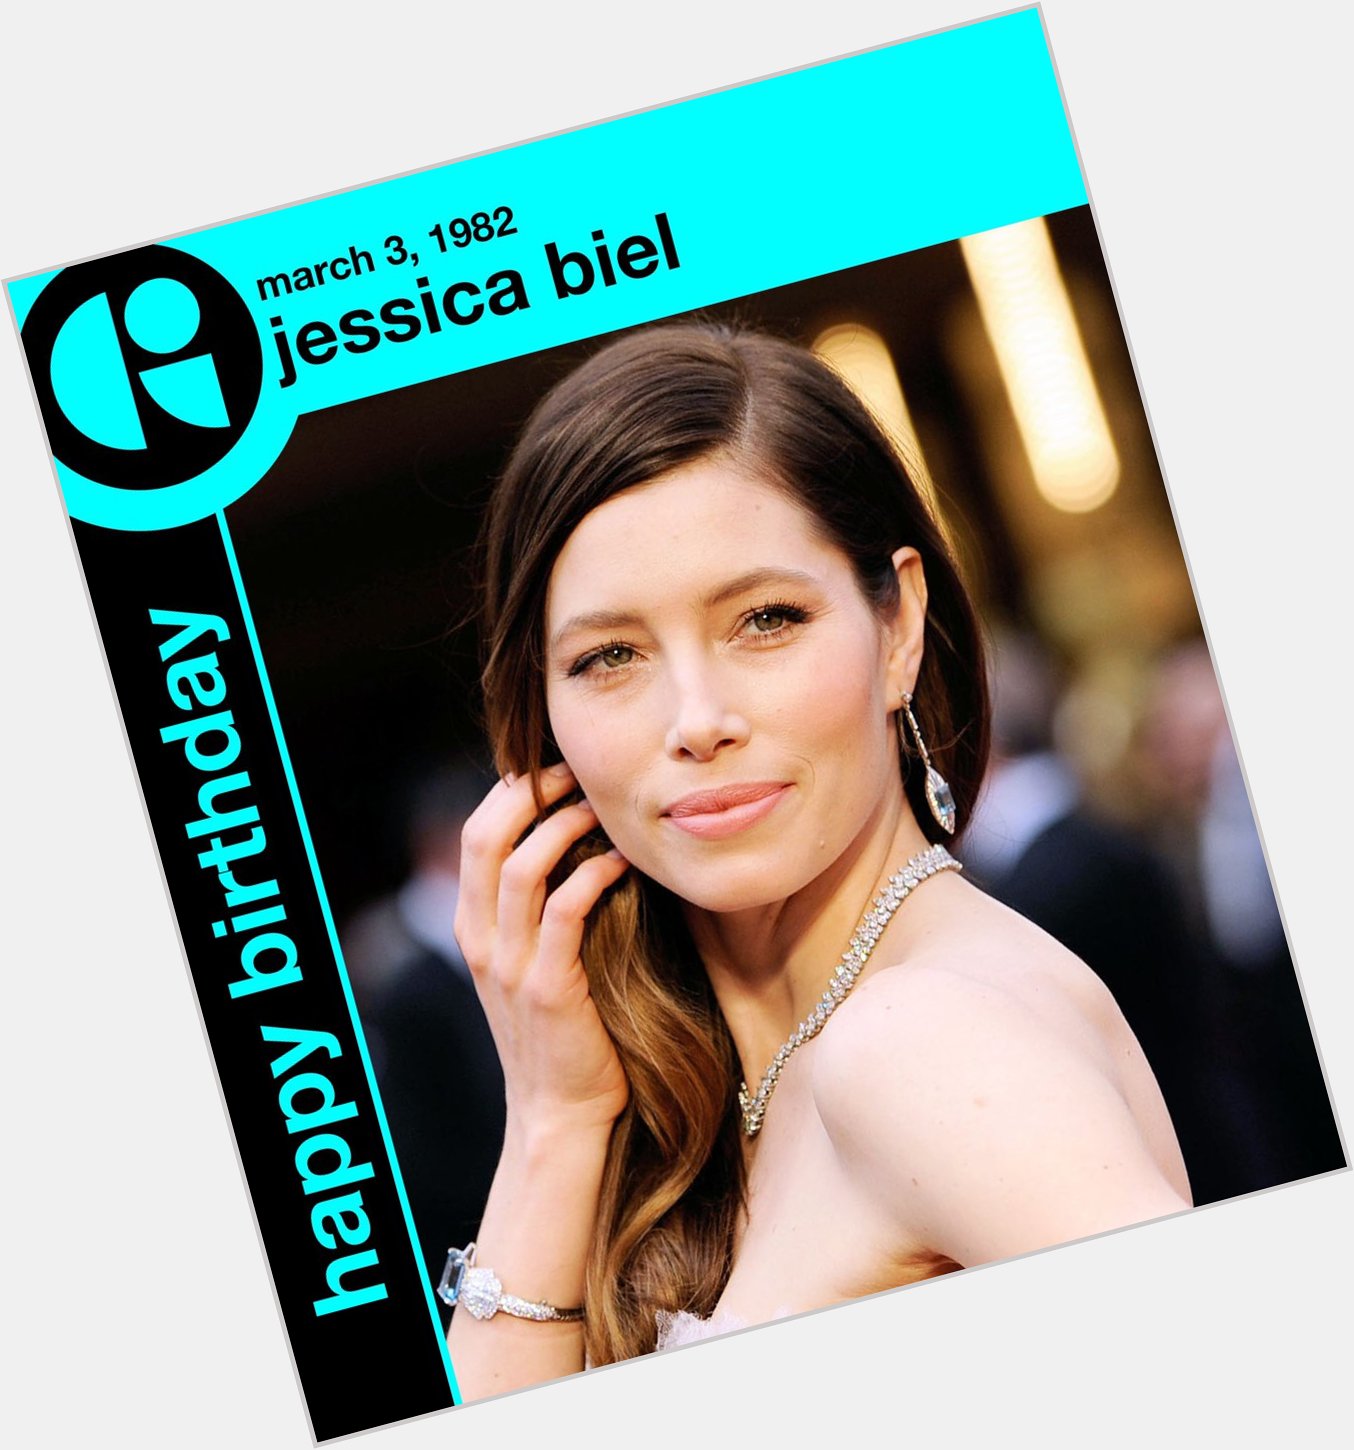 Happy birthday to Jessica Biel! Best known for her roles in 7th Heaven & Blade Trinity     